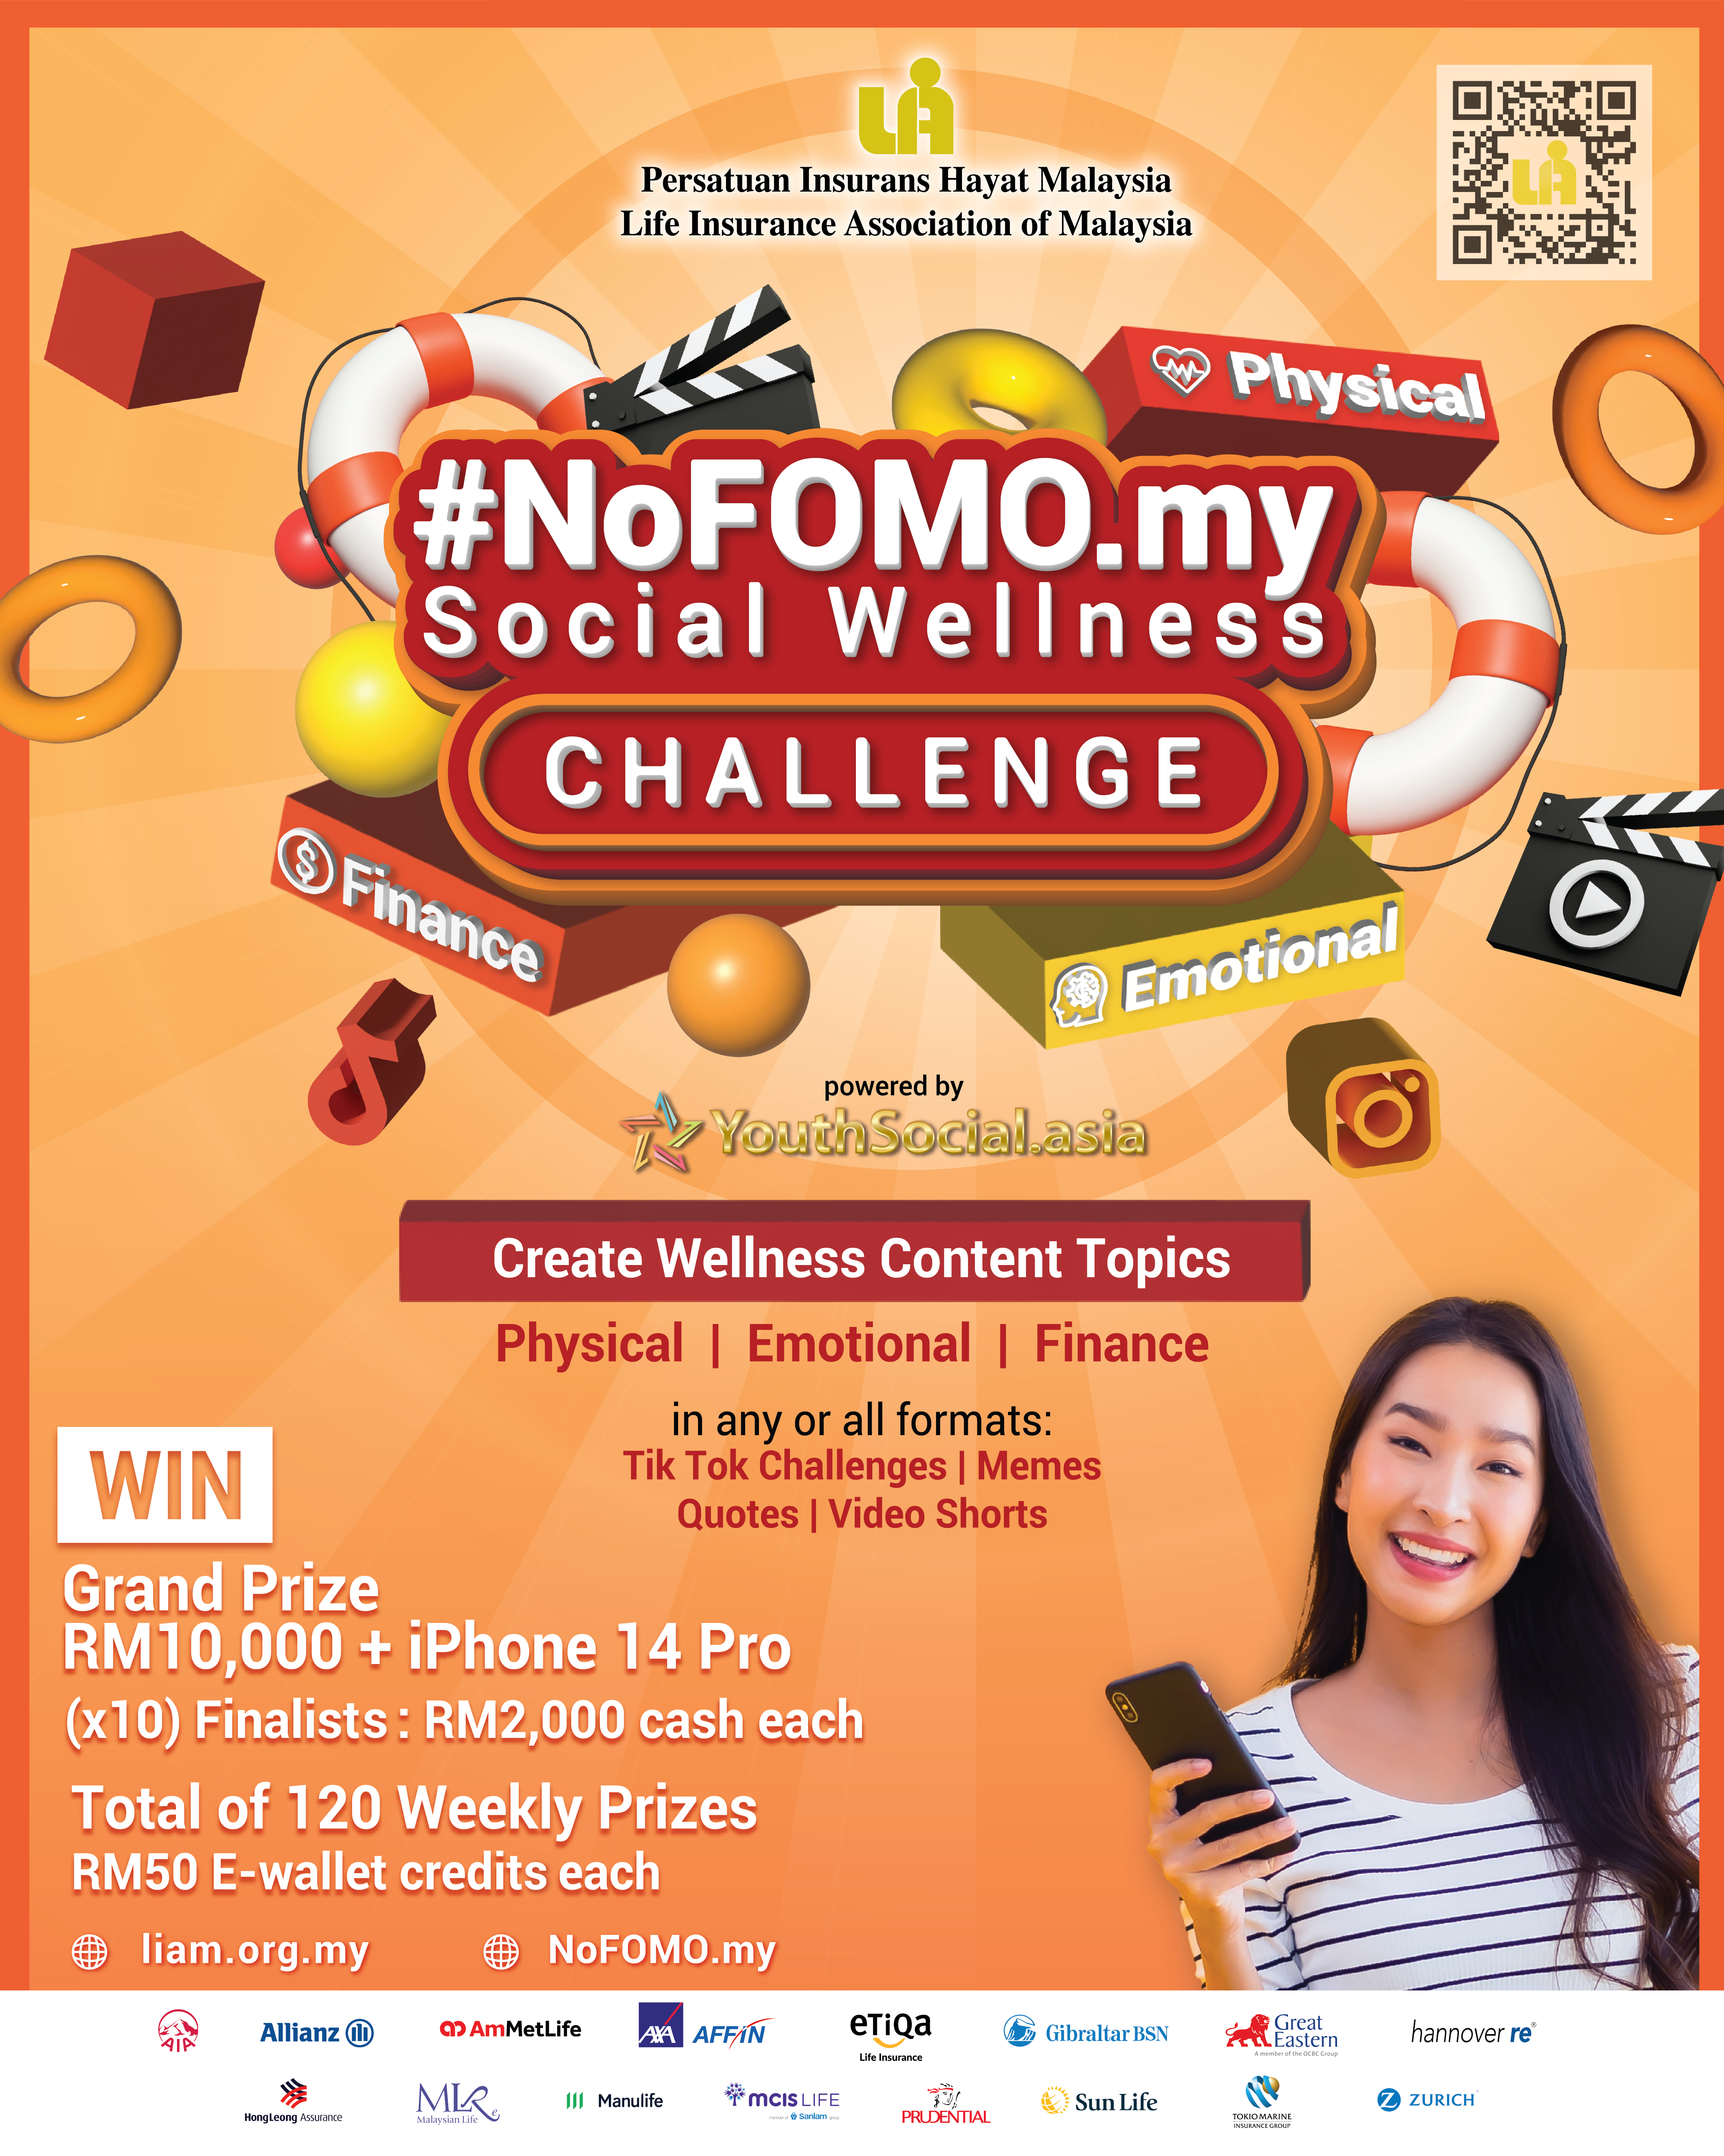 Interested to win up to RM 42,999 in Cash and Prizes? Say no more!